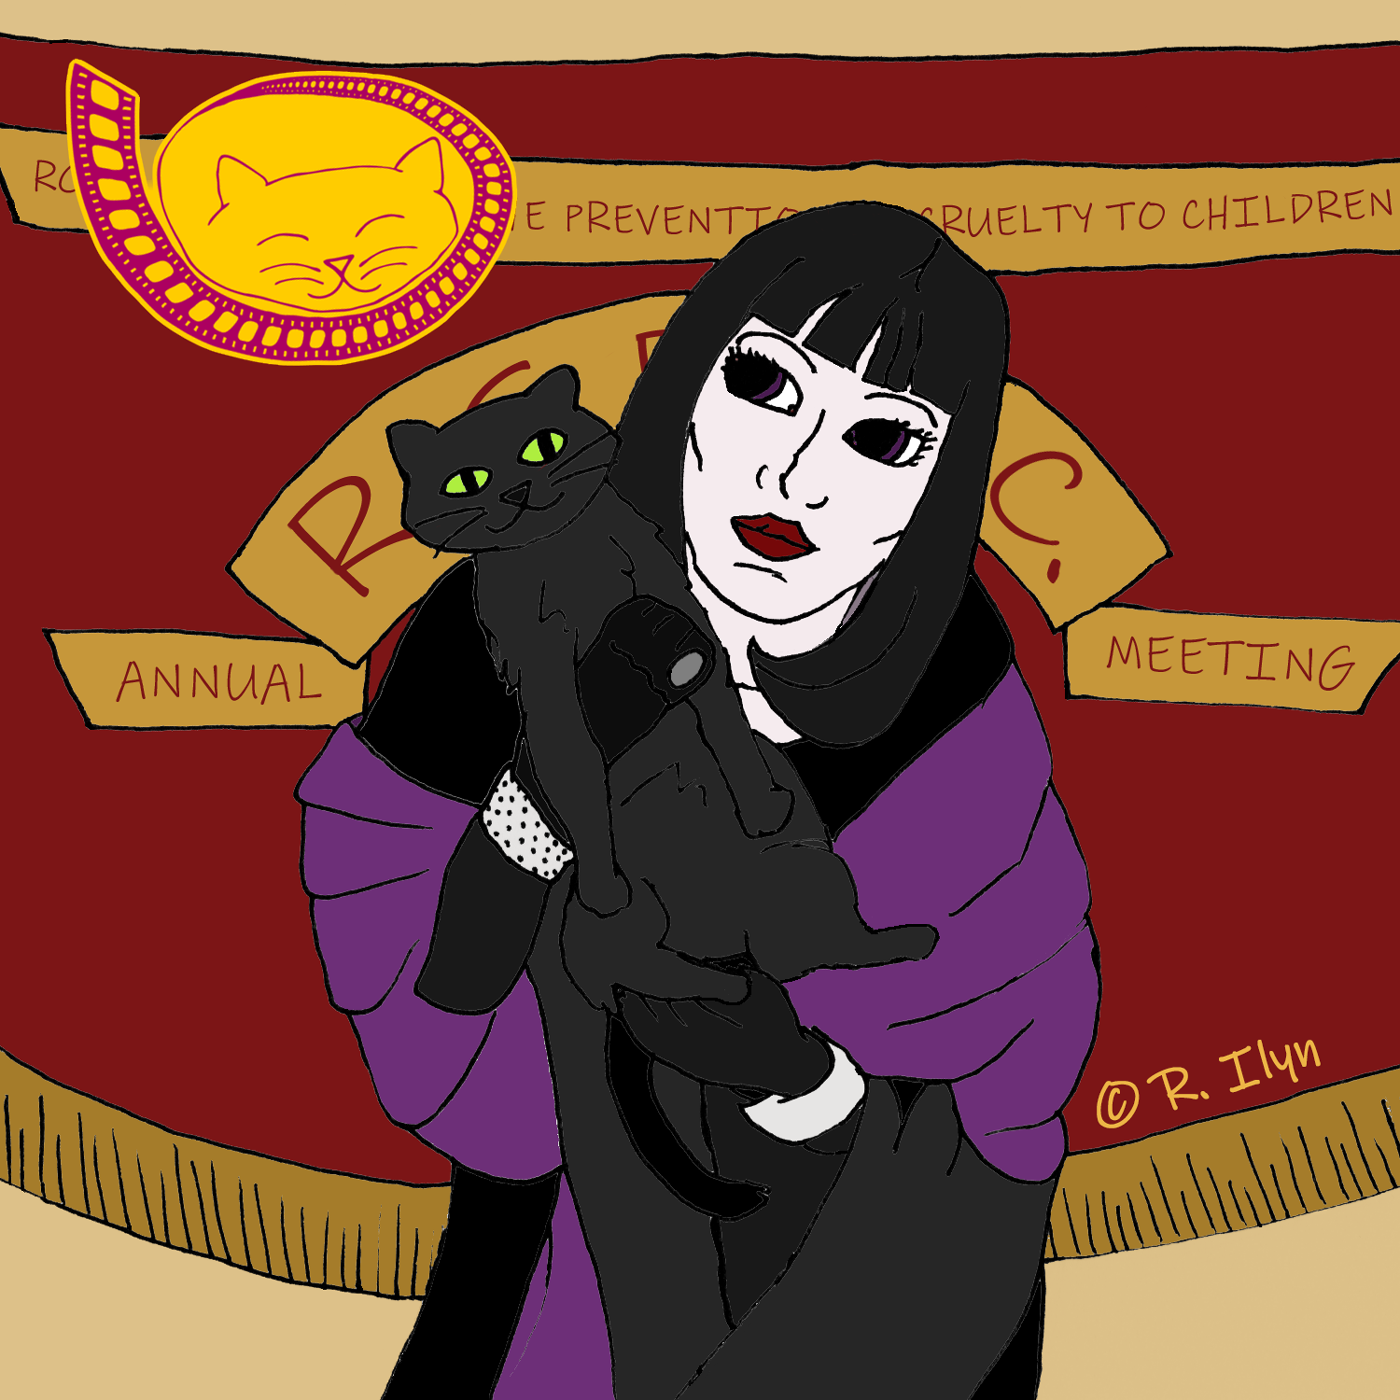 Illustration of kitty cat Liebchen and Grand High Witch Eva from The Witches